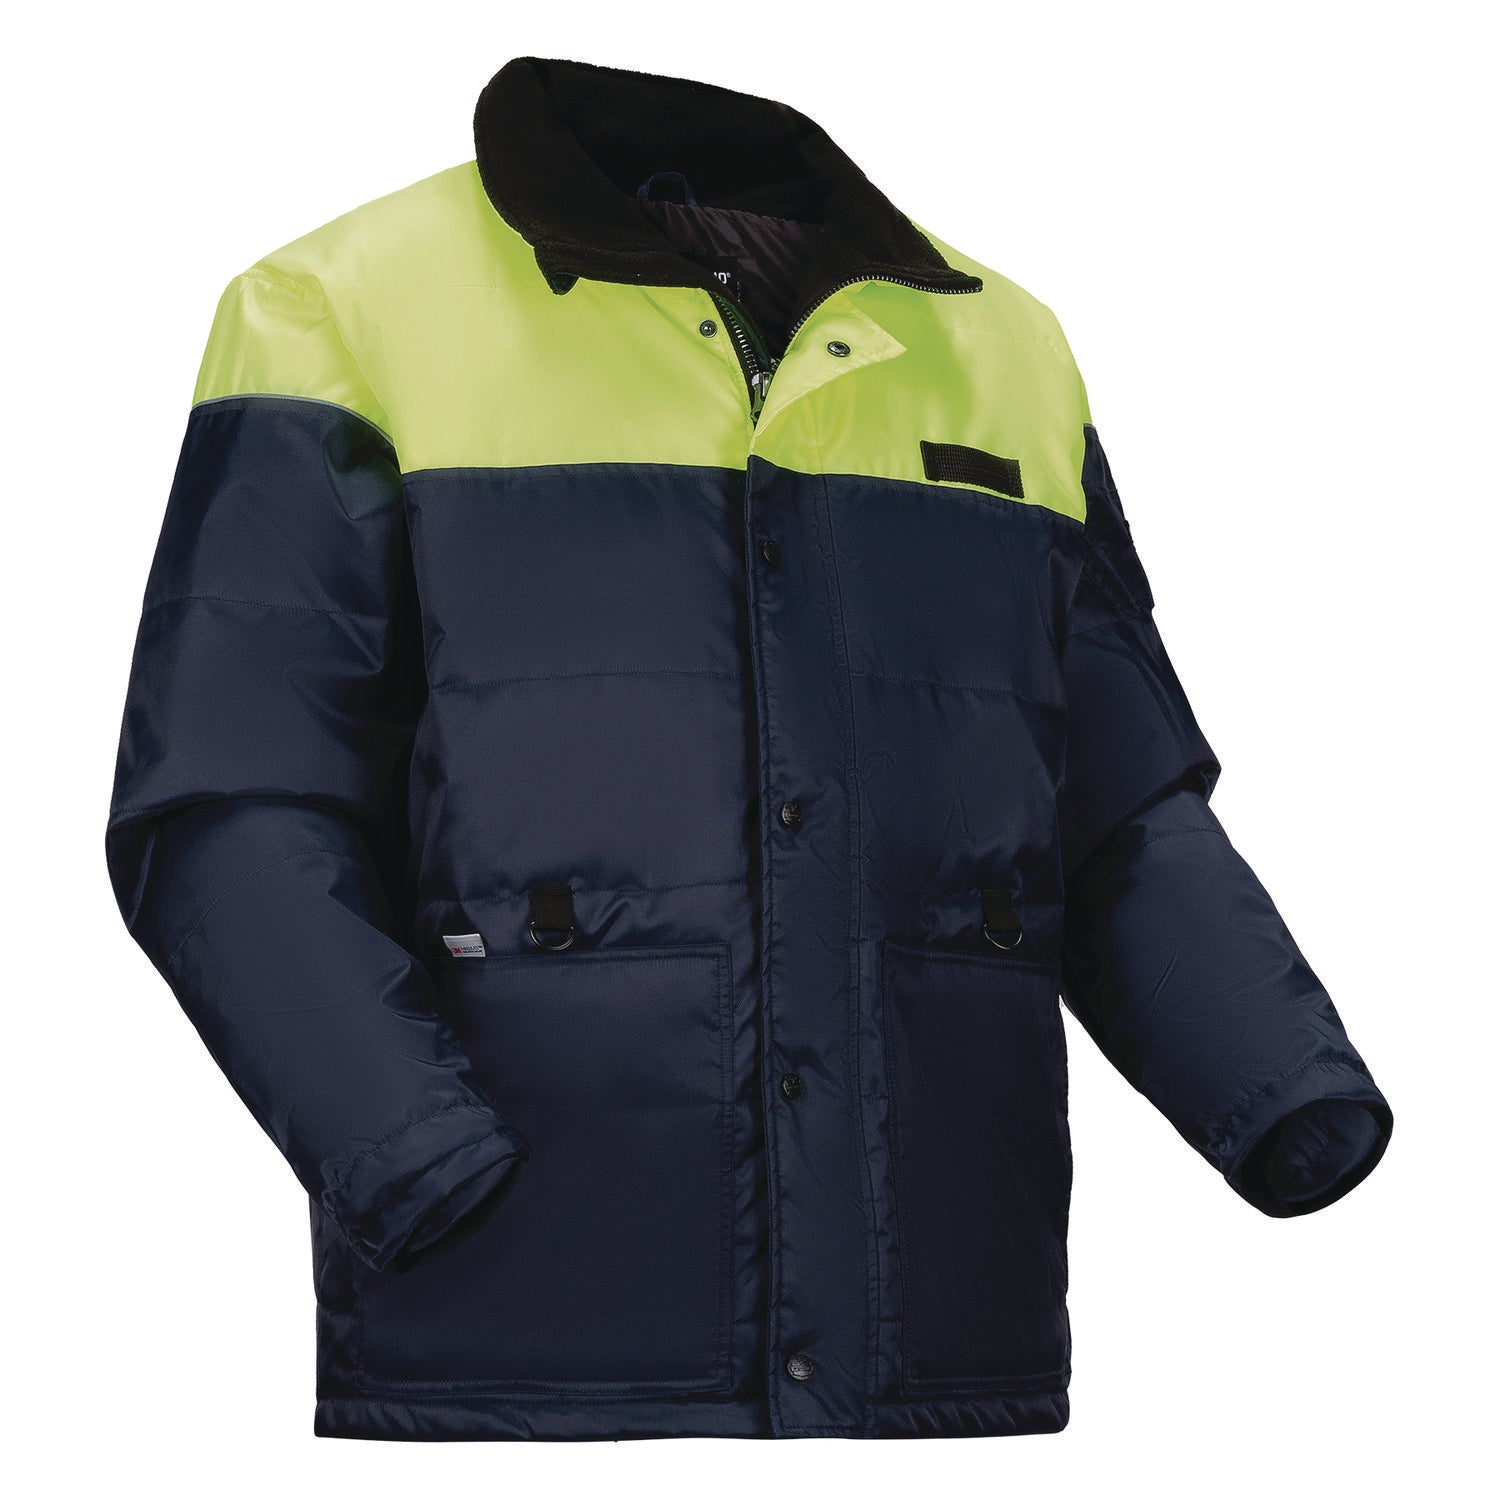 n-ferno-6476-insulated-freezer-jacket-2x-large-navy-ships-in-1-3-business-days_ego41256 - 3